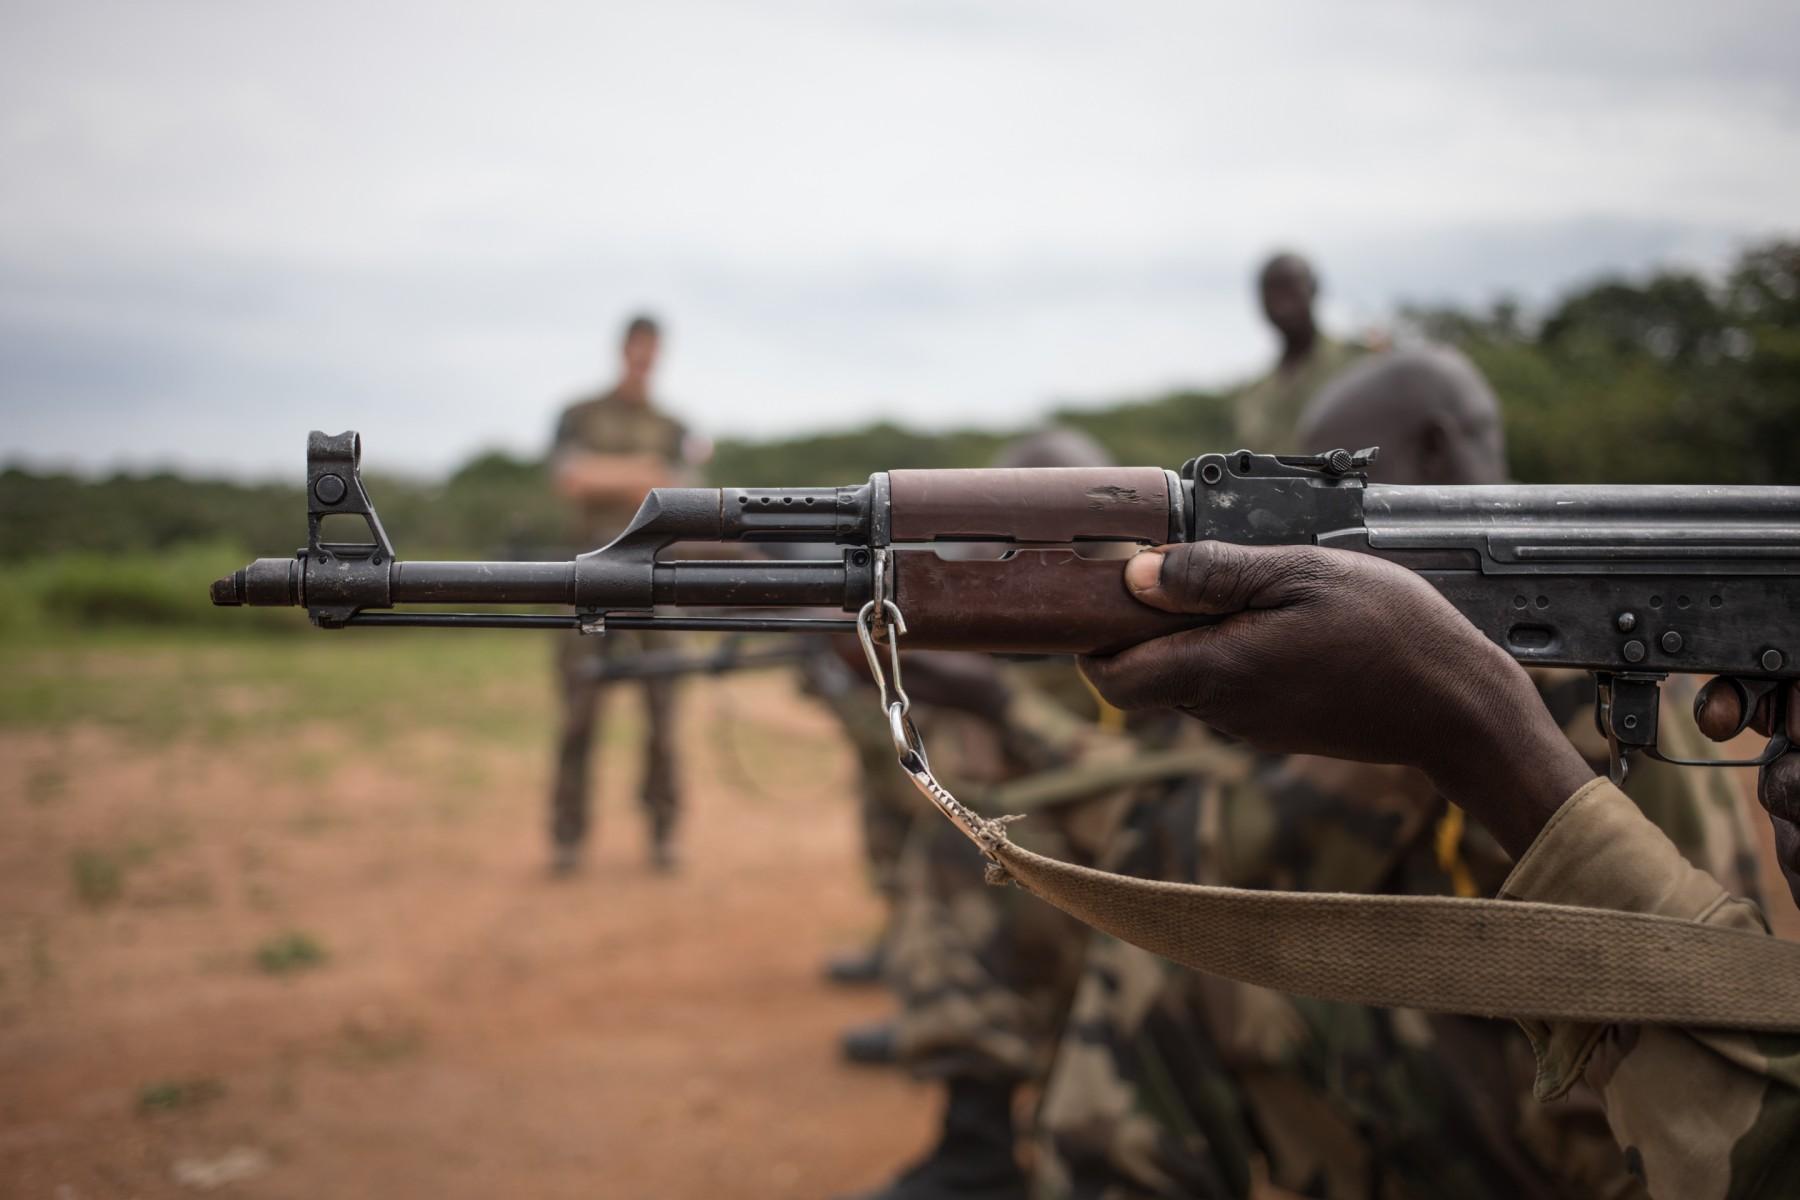 A Central African armed forces recruit aims an AK-47s assault rifle during a shooting session at the Camp Leclerc base in Bouar, northwest from the capital Bangui, on Aug 05, 2019. The European Union Training Mission trains the Central African Armed Forces at the rehabilitated Leclrec camp, a former French base that was handed over to the Central African State in 1997. Photo: AFP